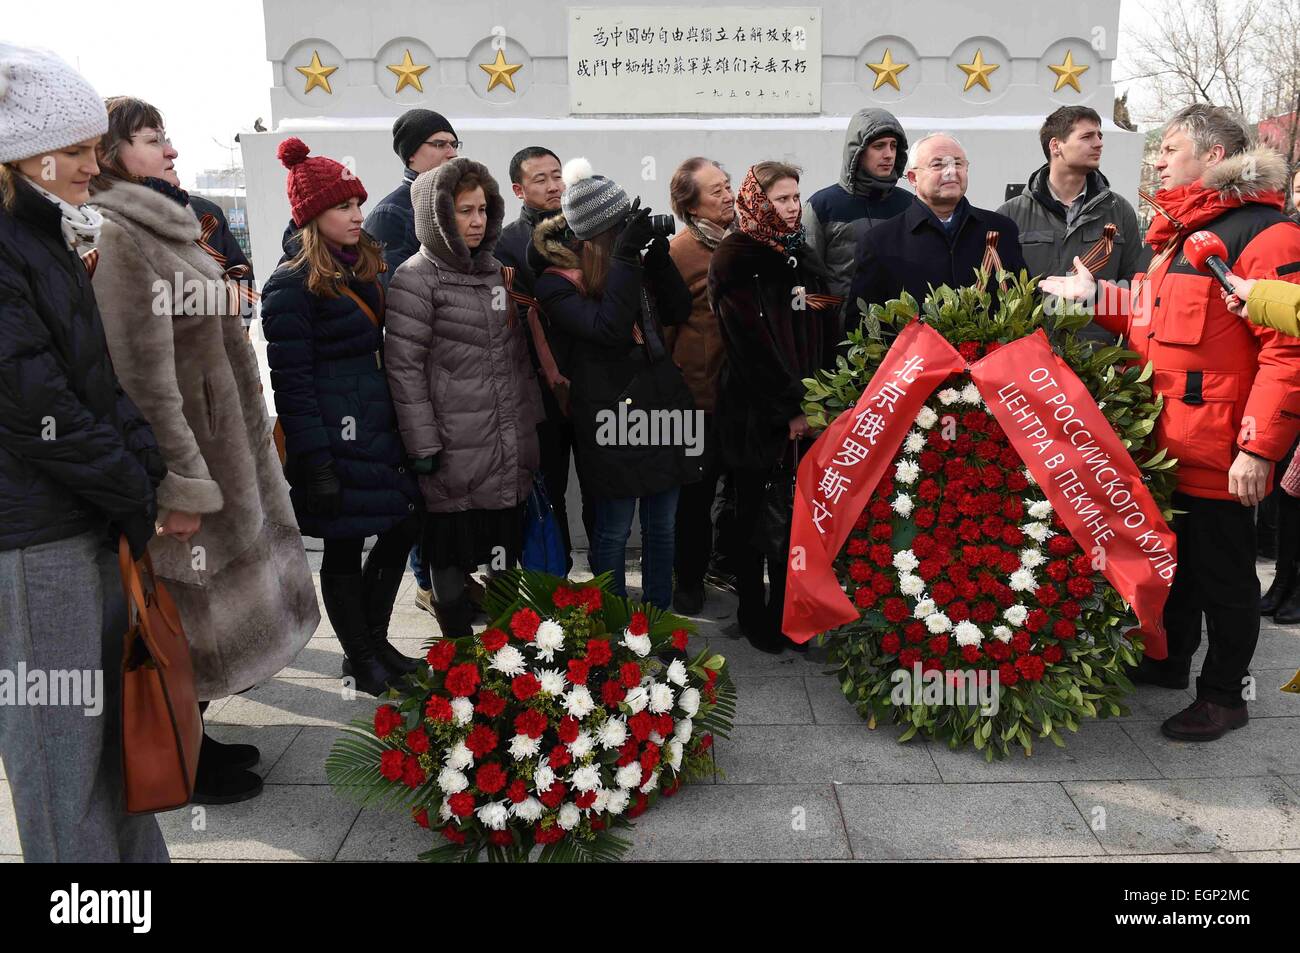 Harbin,China. 28th Feb, 2015. Representatives of Russians living in Harbin, capital of northeast China's Heilongjiang Province, pose for a group picture after laying flowers at Soviet martyrs monument in Harbin, Feb. 28, 2015. Dozens of Russians living and working in Harbin attended a commemorative activity for Soviet Red Army soldiers who sacrificed during World War II on Saturday. The monument was set up in 1945 to commemorate Soviet soldiers who were killed in the fight against the Japanese invaders in China. Credit:  Wang Jianwei/Xinhua/Alamy Live News Stock Photo